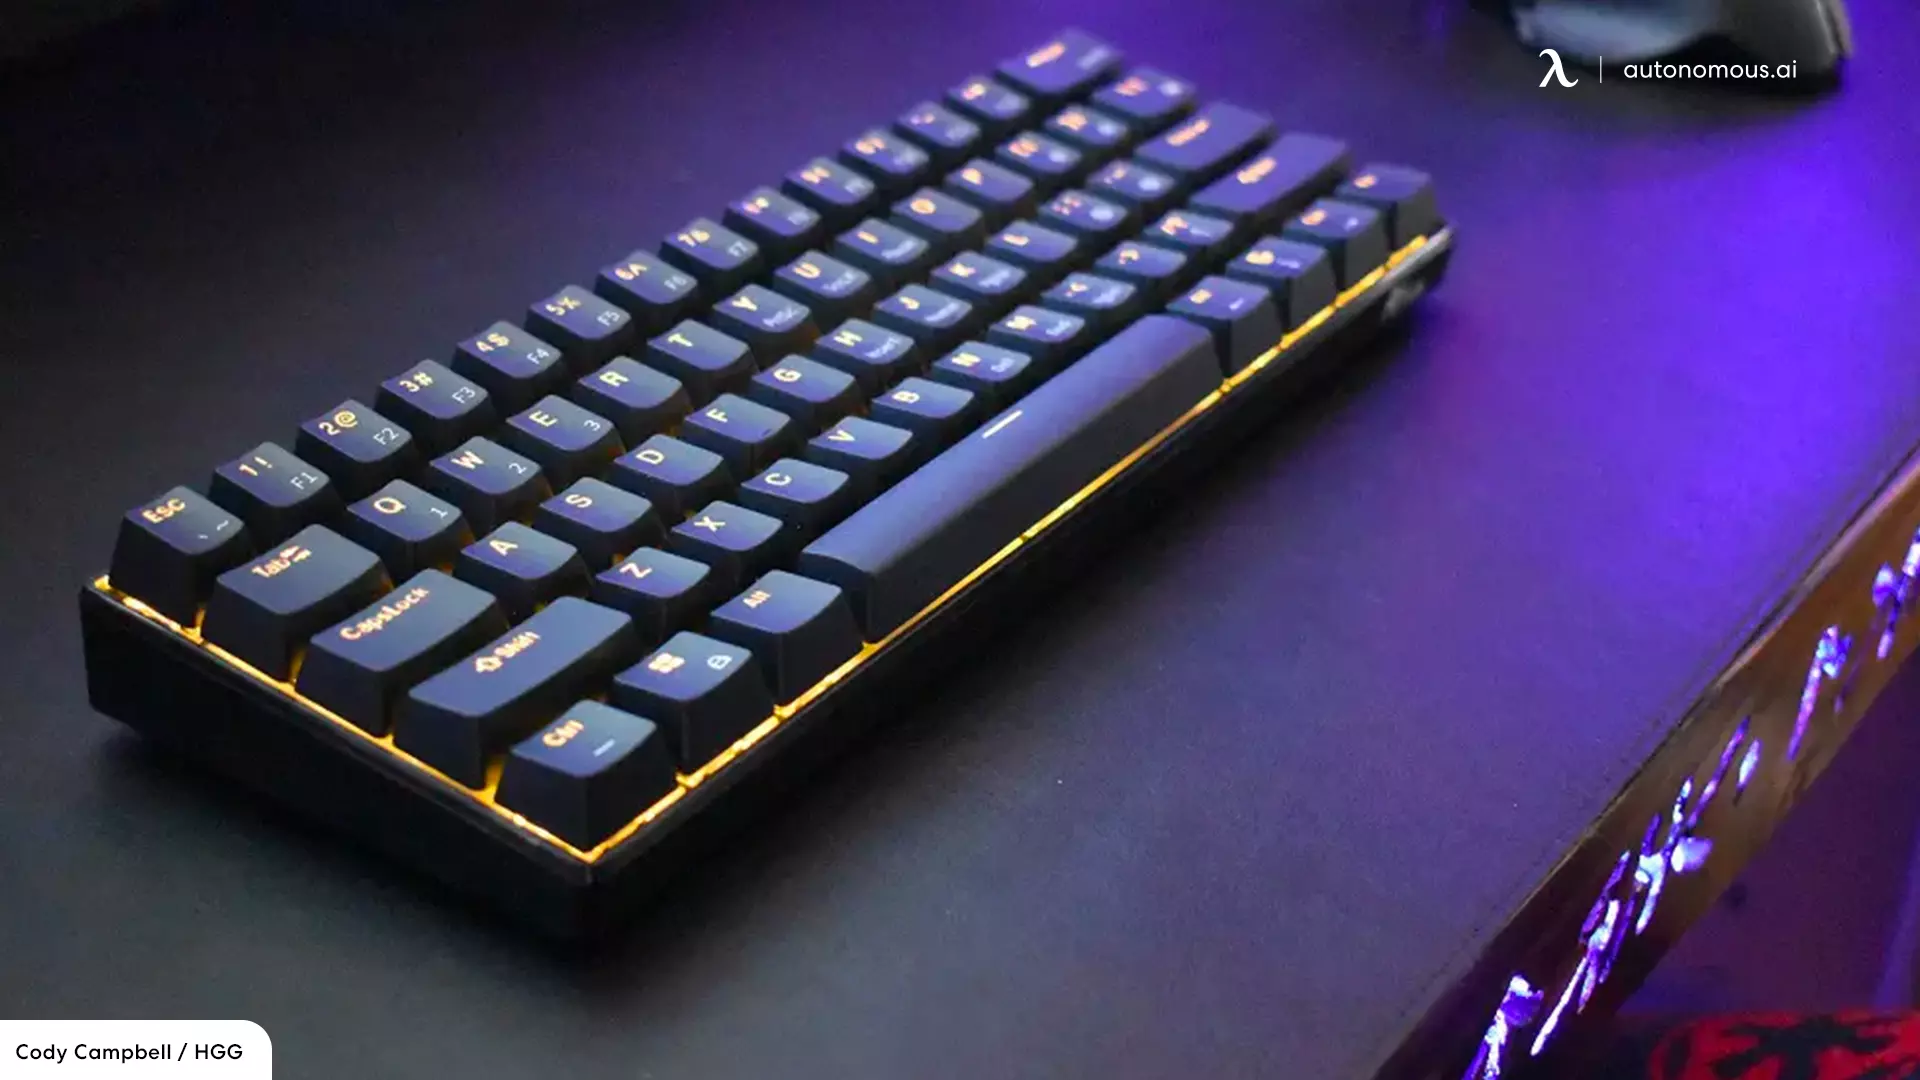 Why Are Pro Gamers Using Royal Kludge Keyboards?